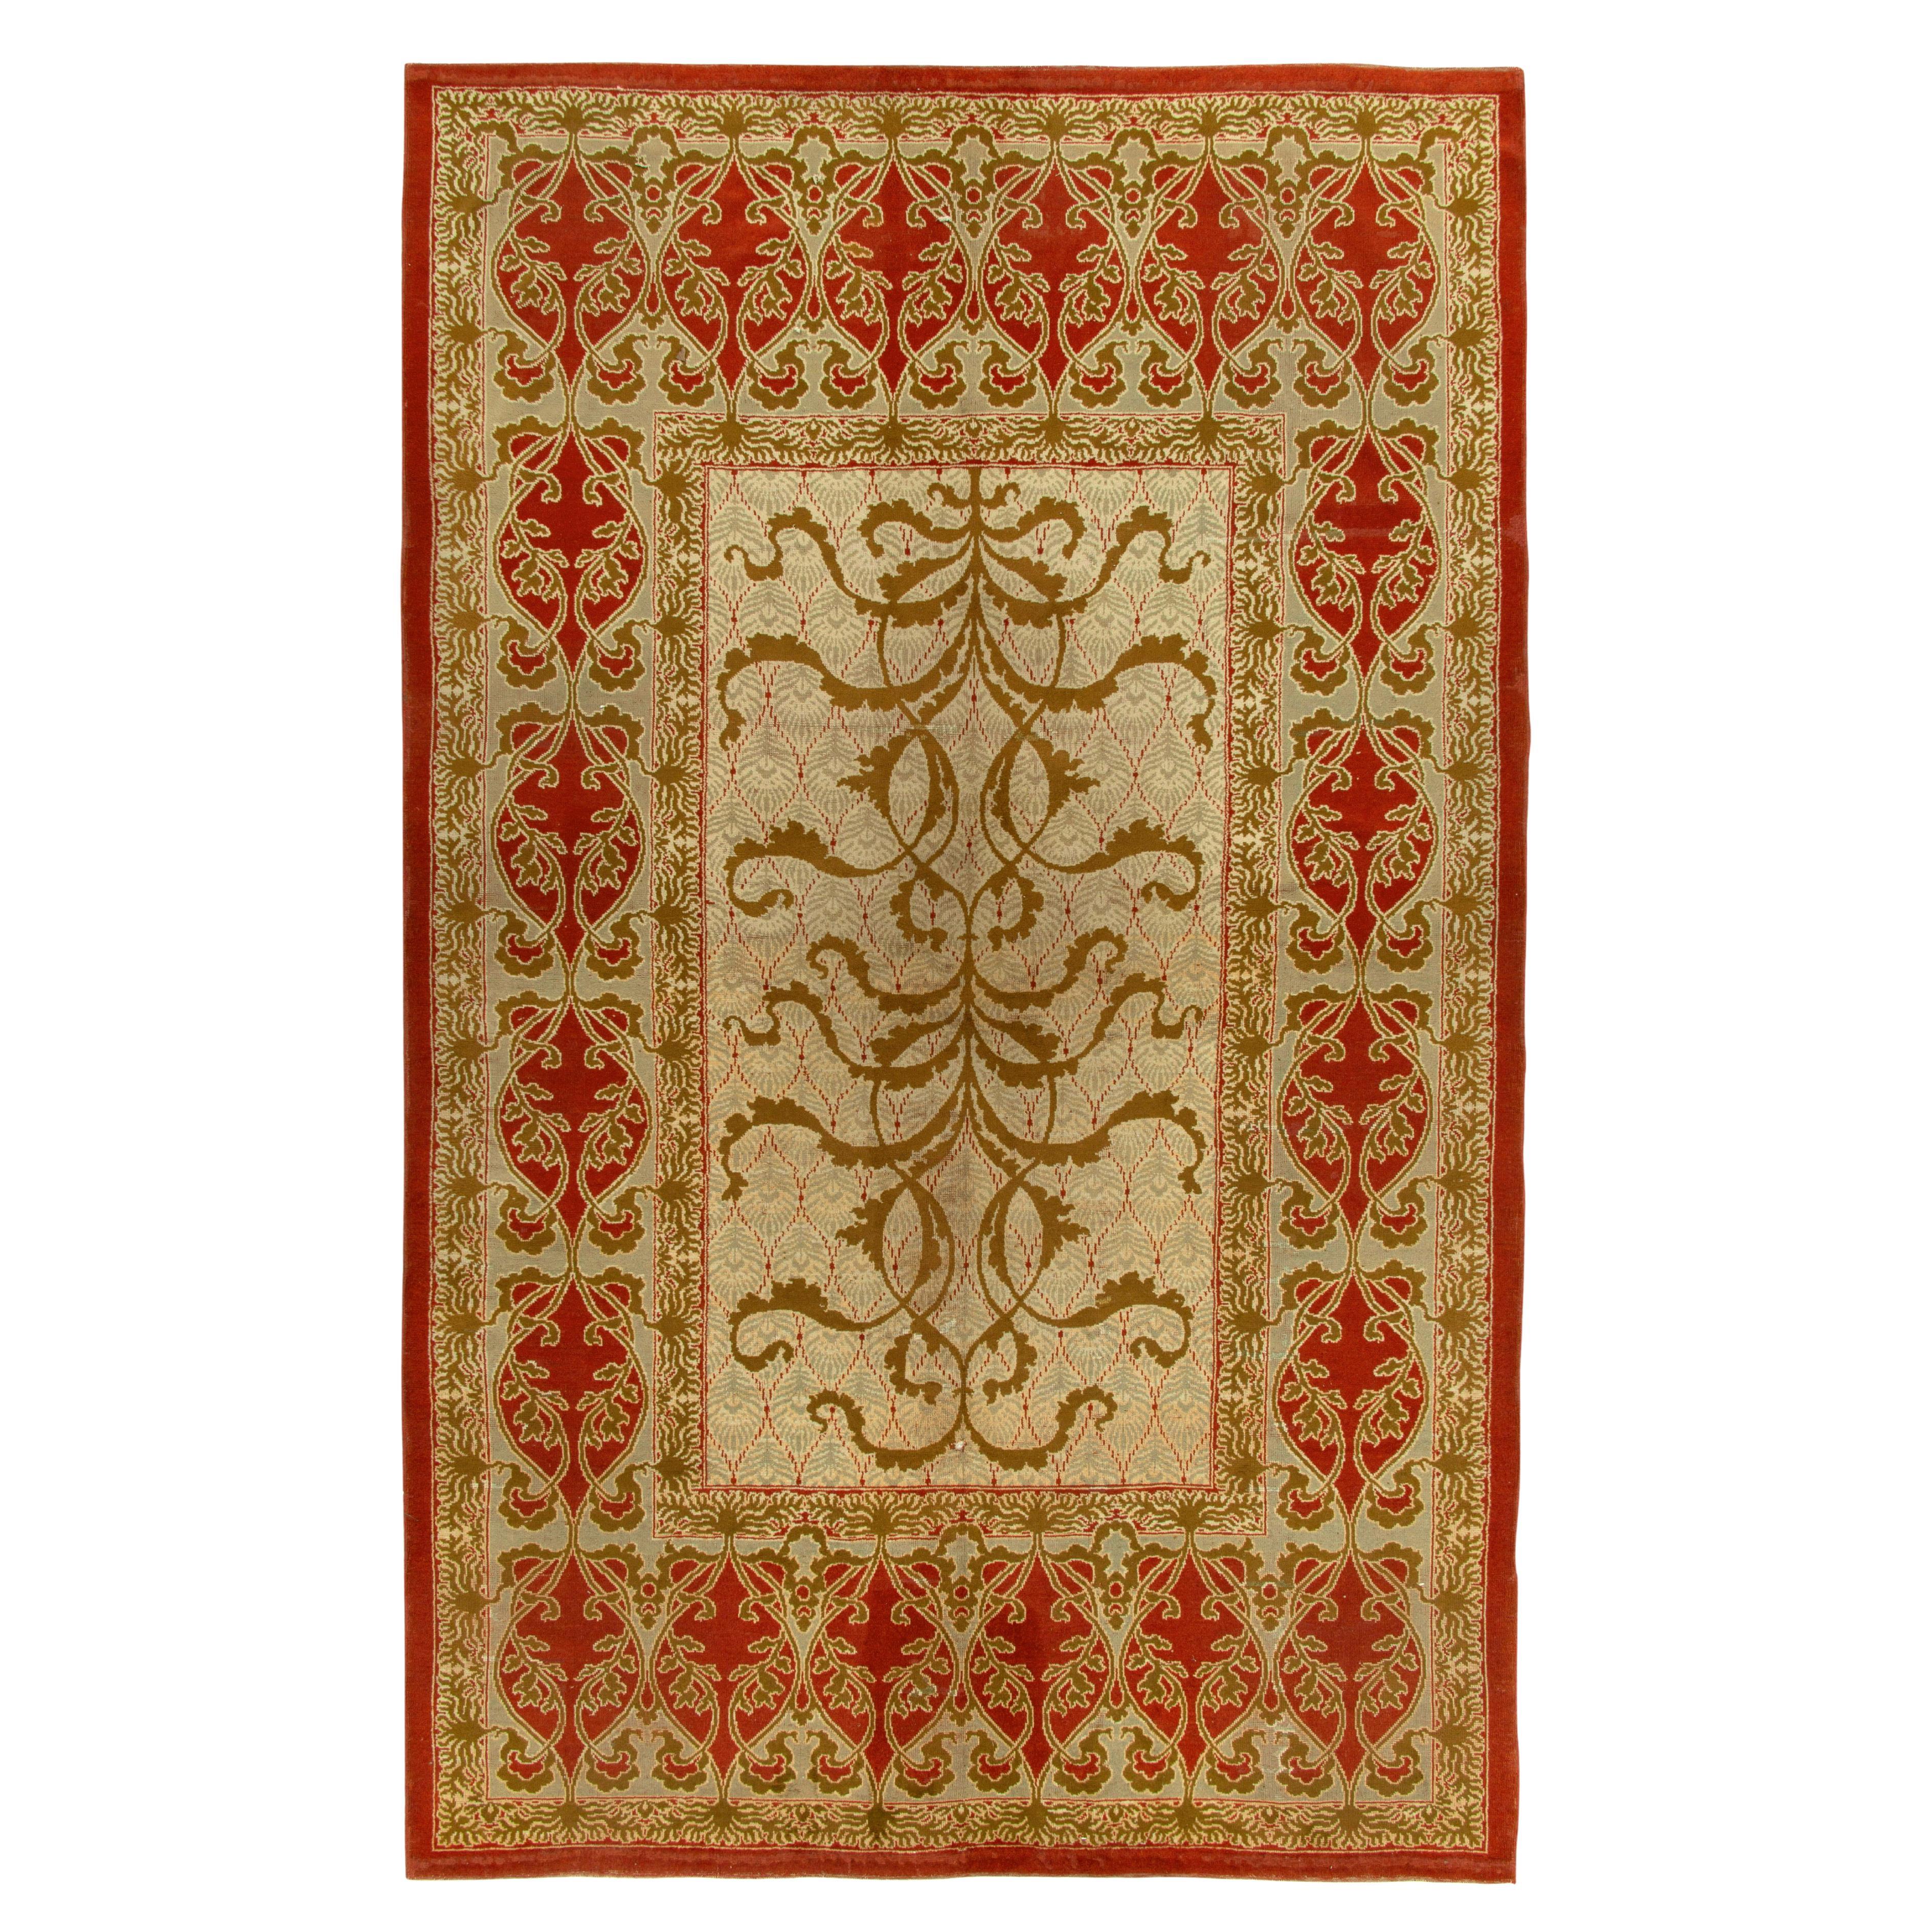 Antique Art Nouveau Rug in Red, Green, Brown Floral Pattern by Rug & Kilim